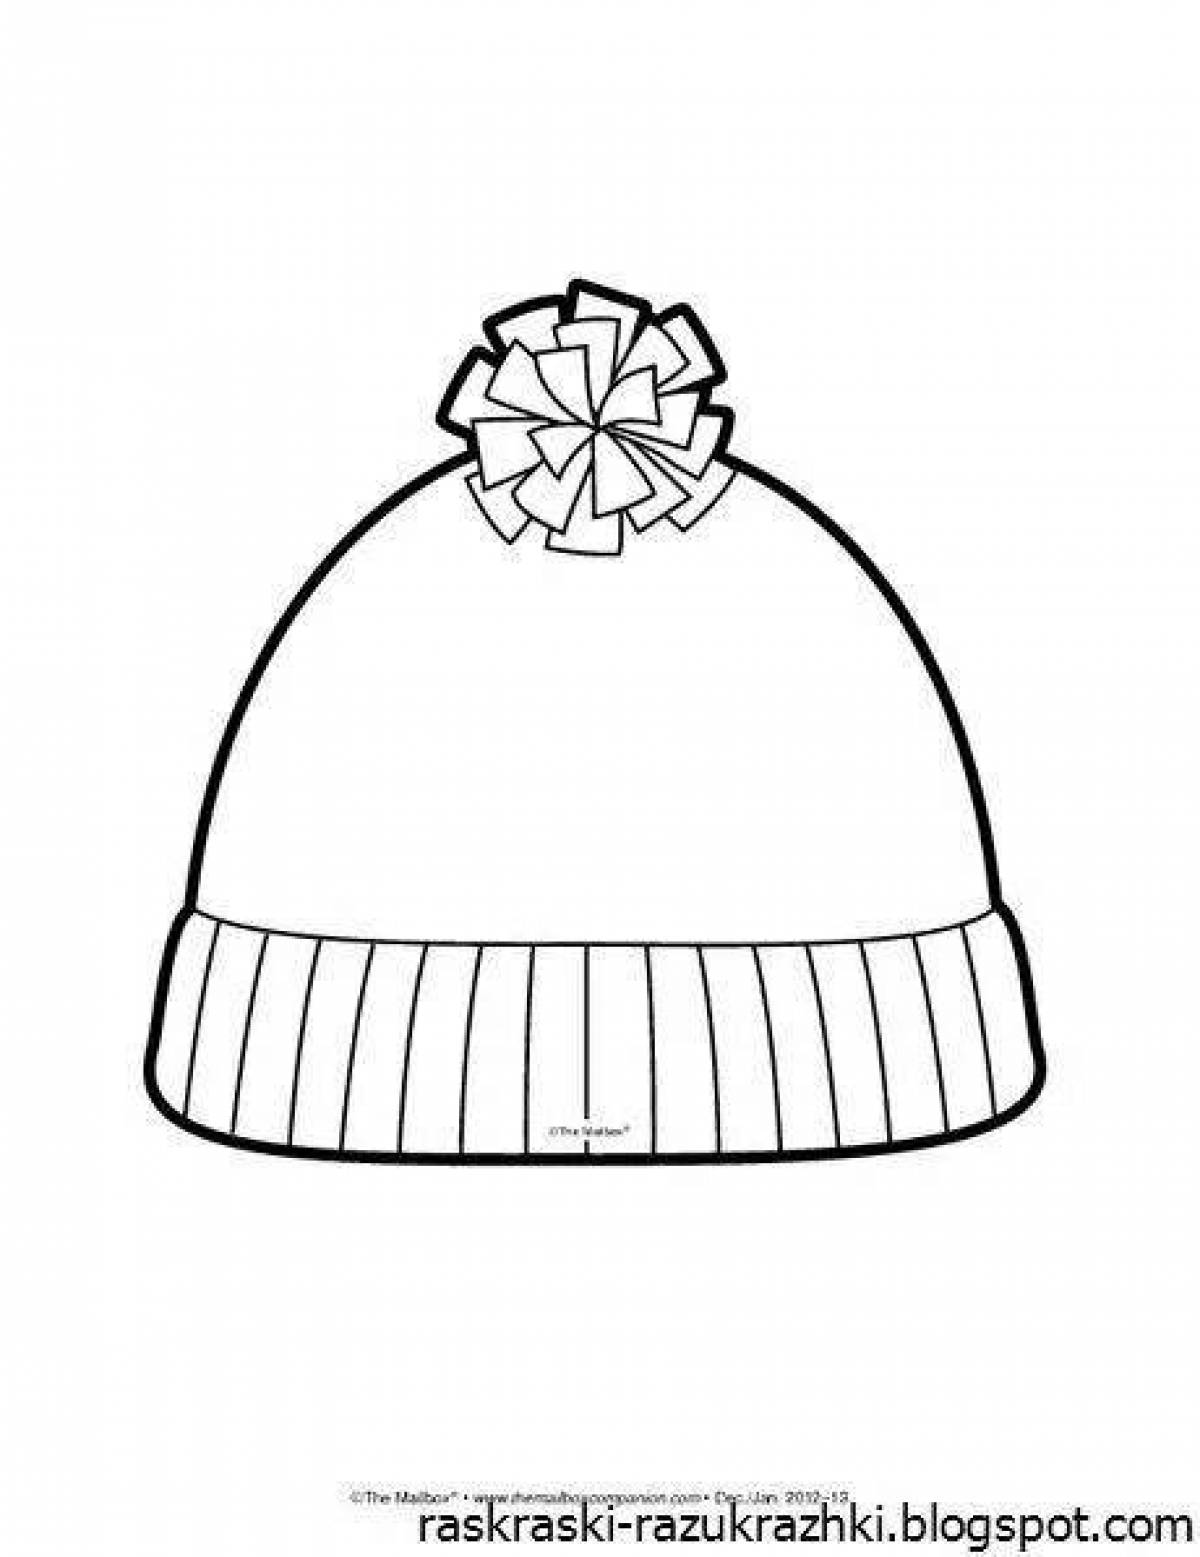 Coloring page funny hat for children 2-3 years old